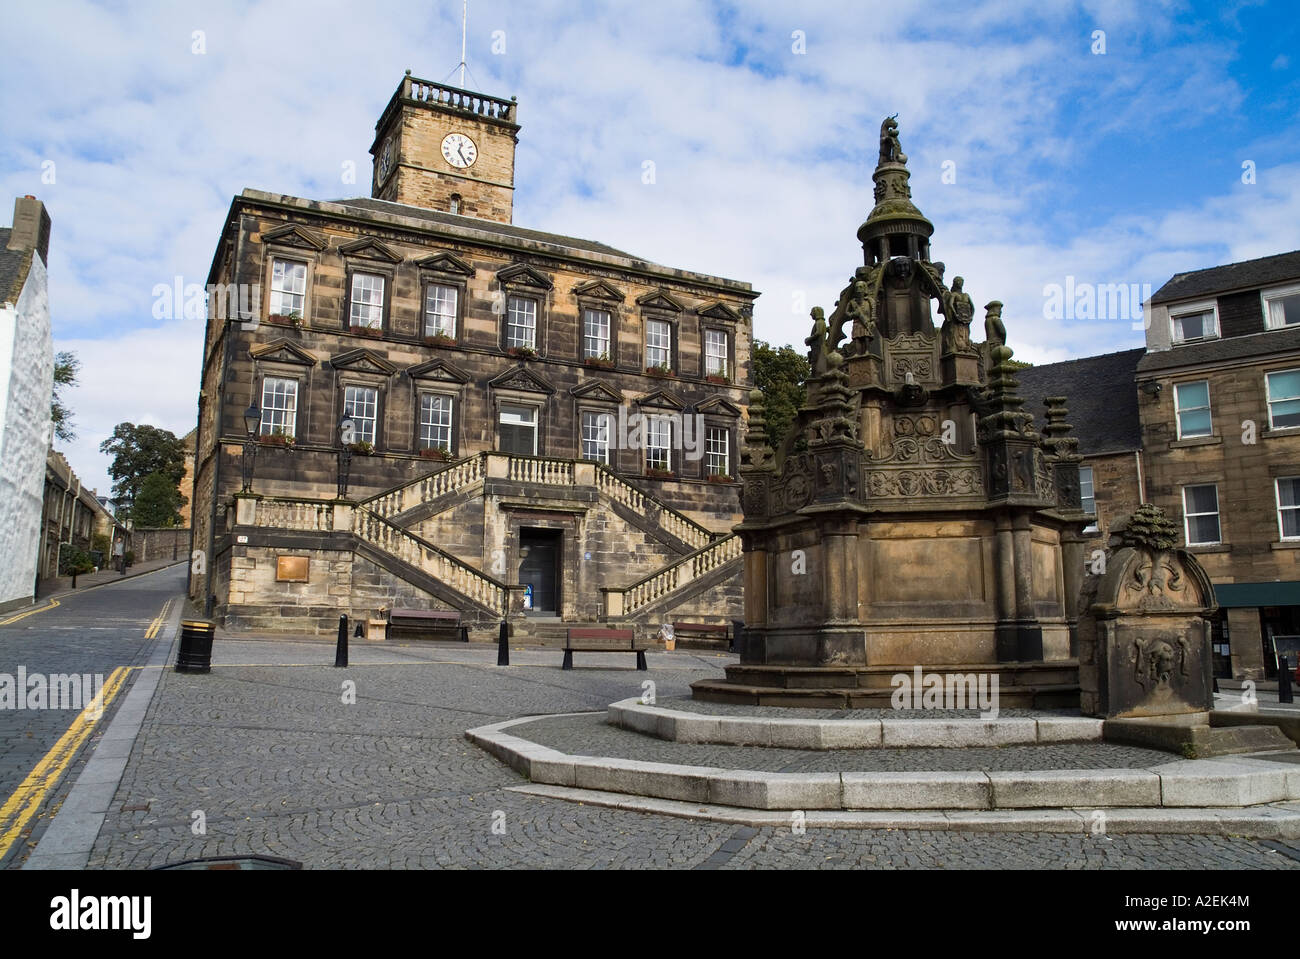 dh Town House LINLITHGOW WEST LOTHIAN Linlithgow cross town well water feature fountain High street square centre uk scotland Stock Photo